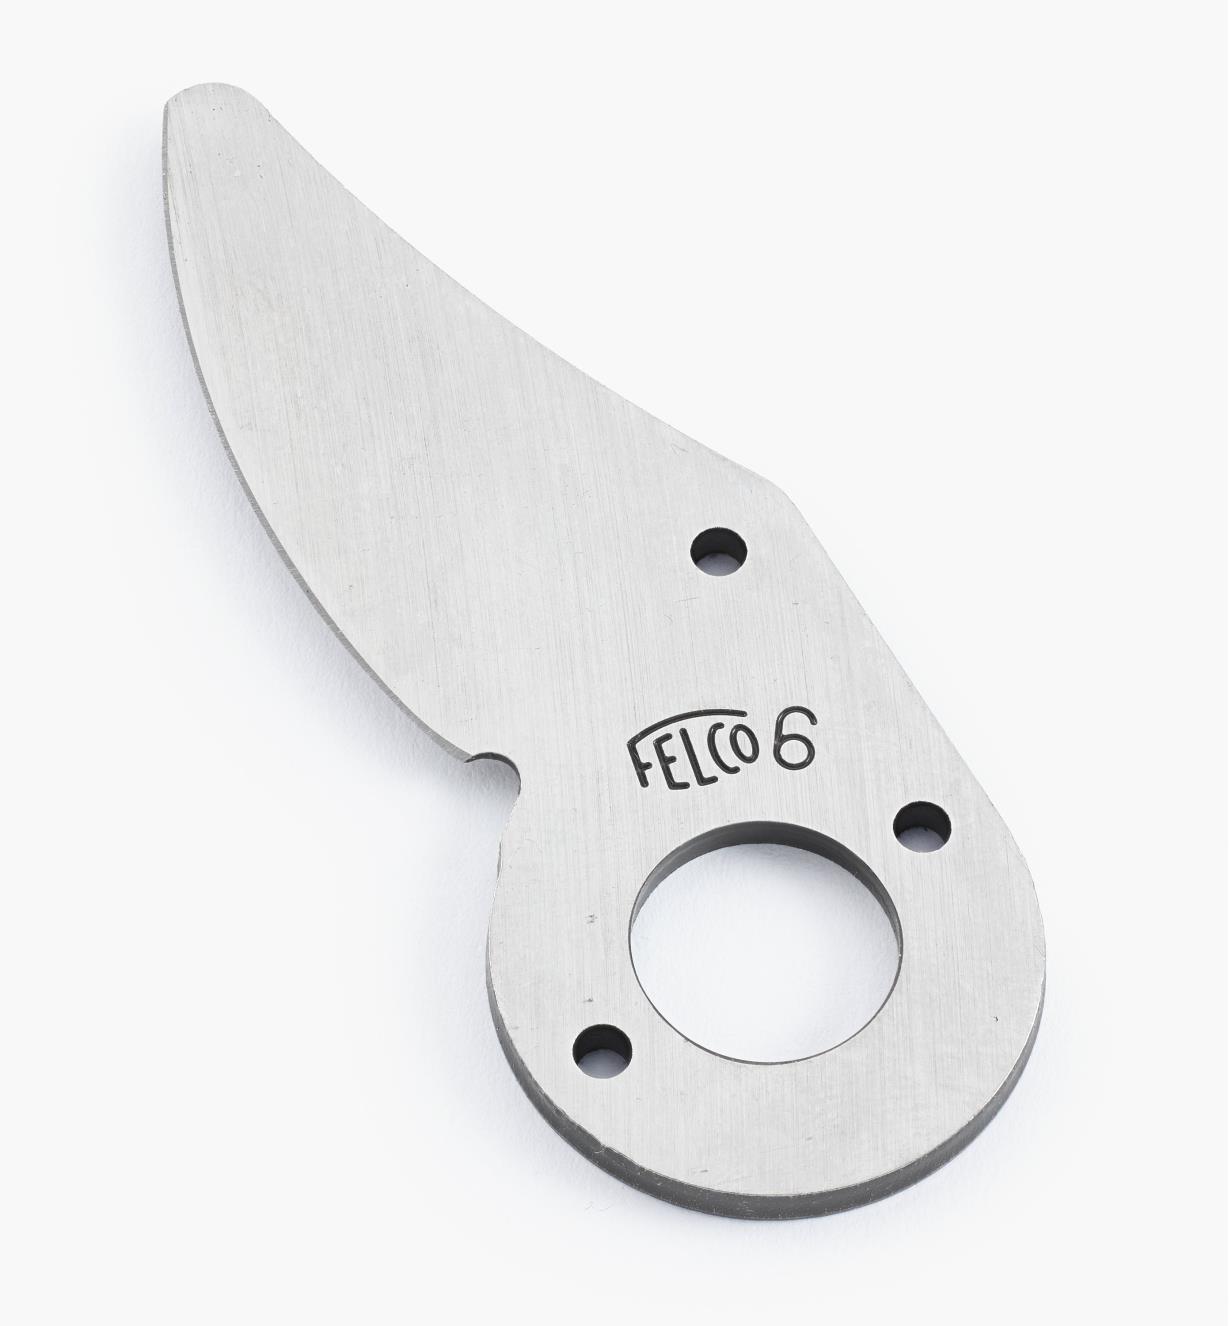 AB209 - Felco Blade for #6 & #12 Pruners